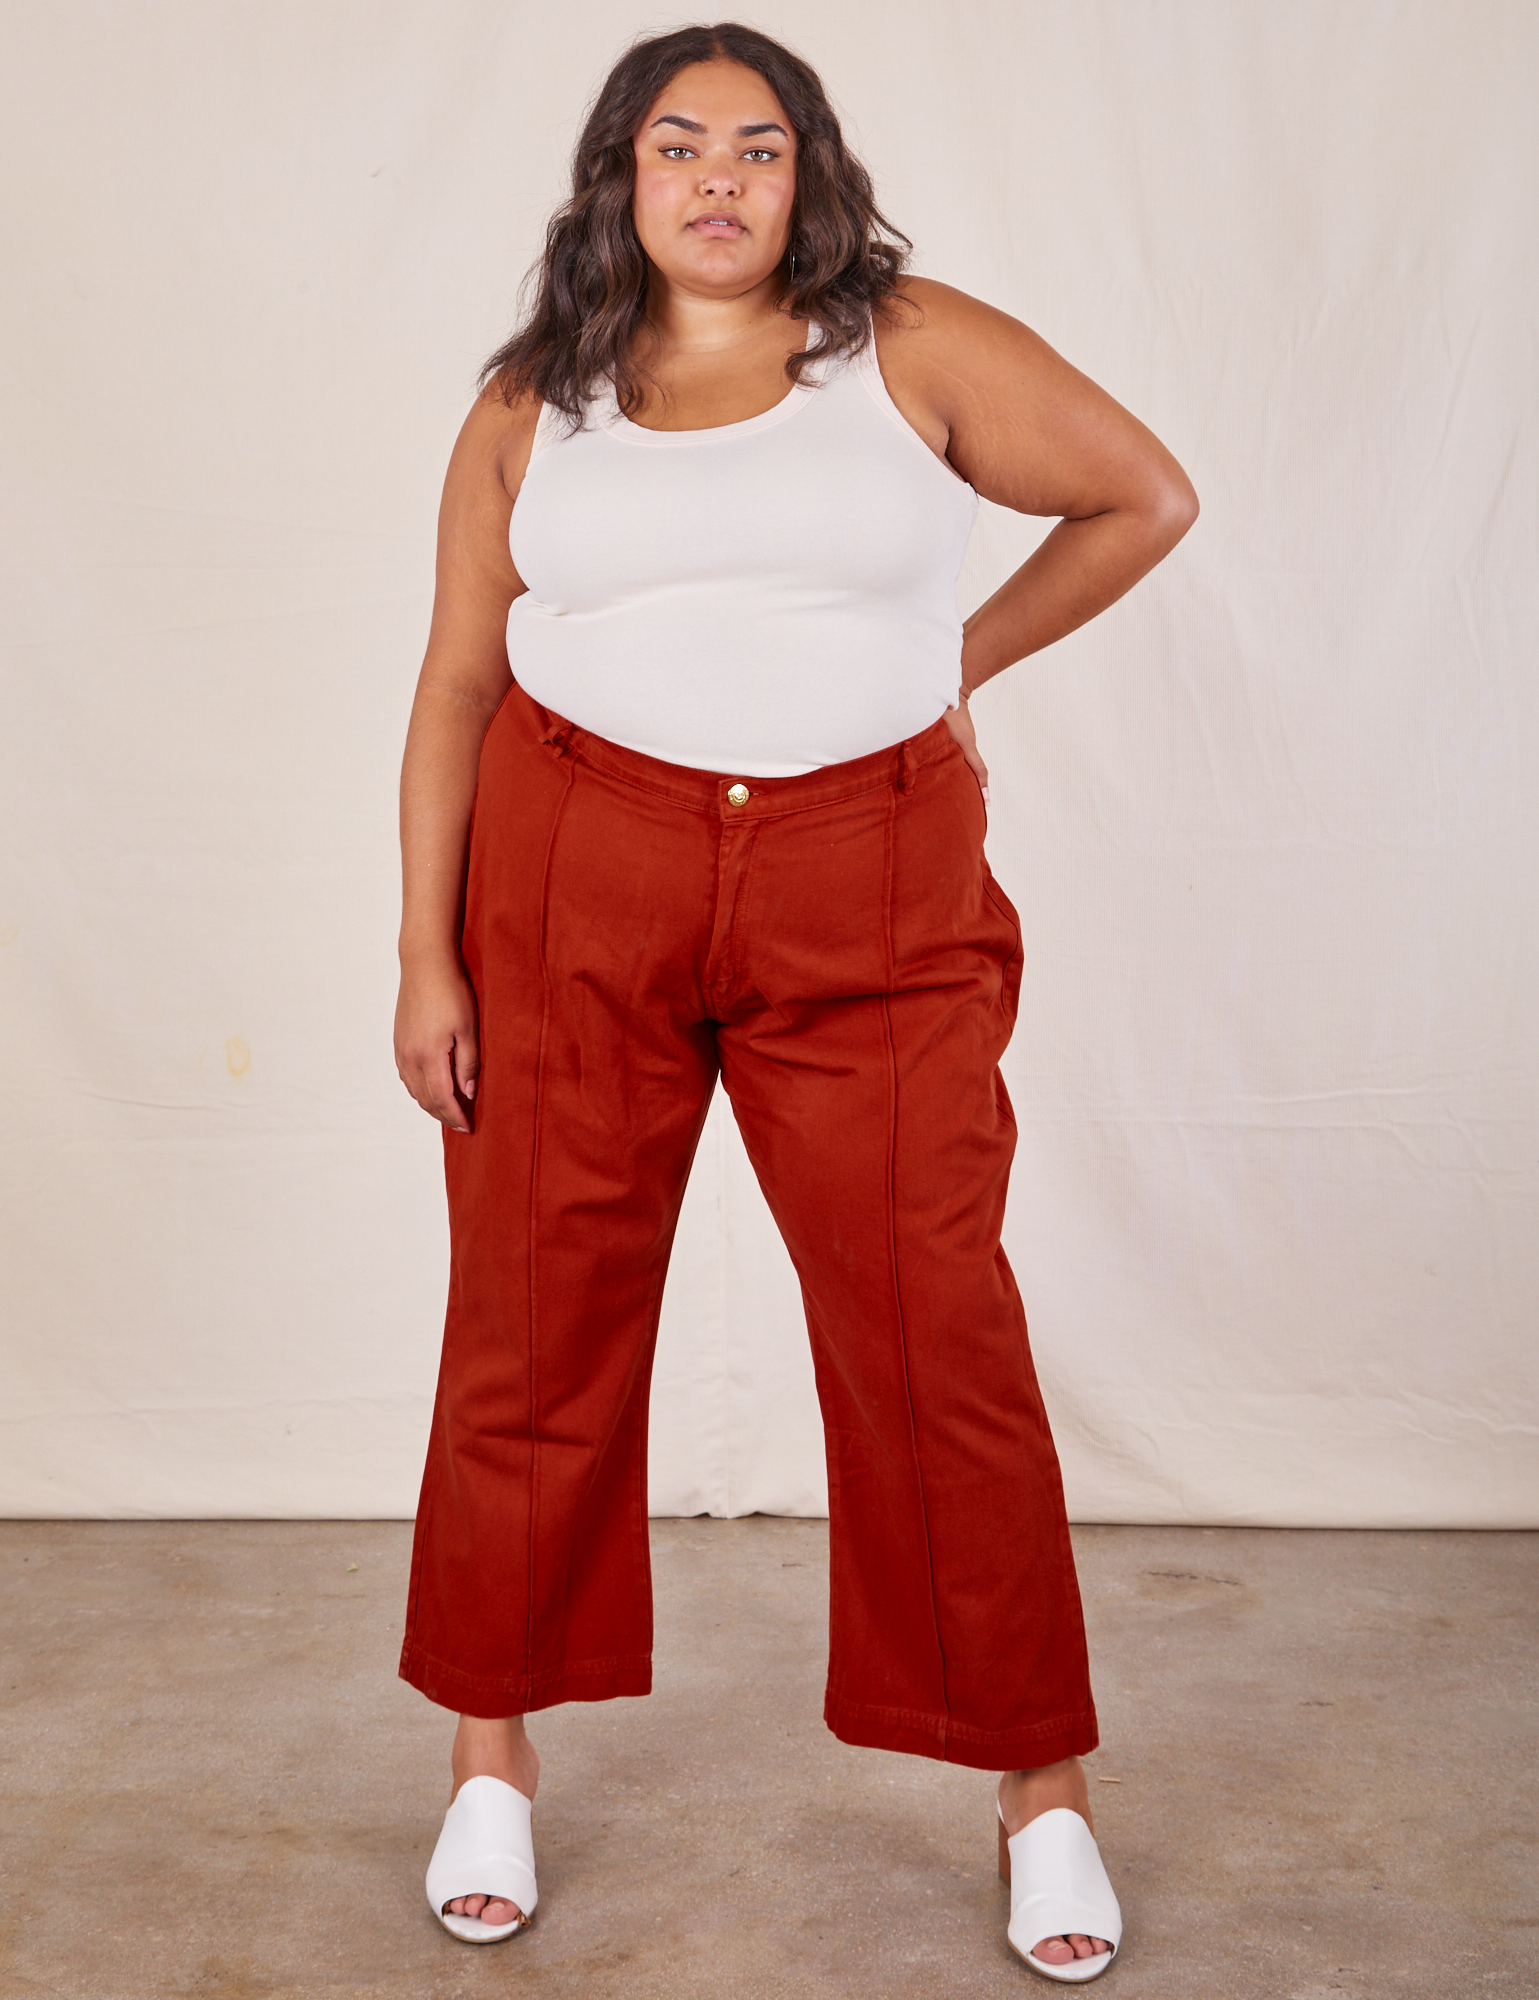 Alicia is 5&#39;9&quot; and wearing 2XL Western Pants in Paprika paired with a vintage off-white Tank Top